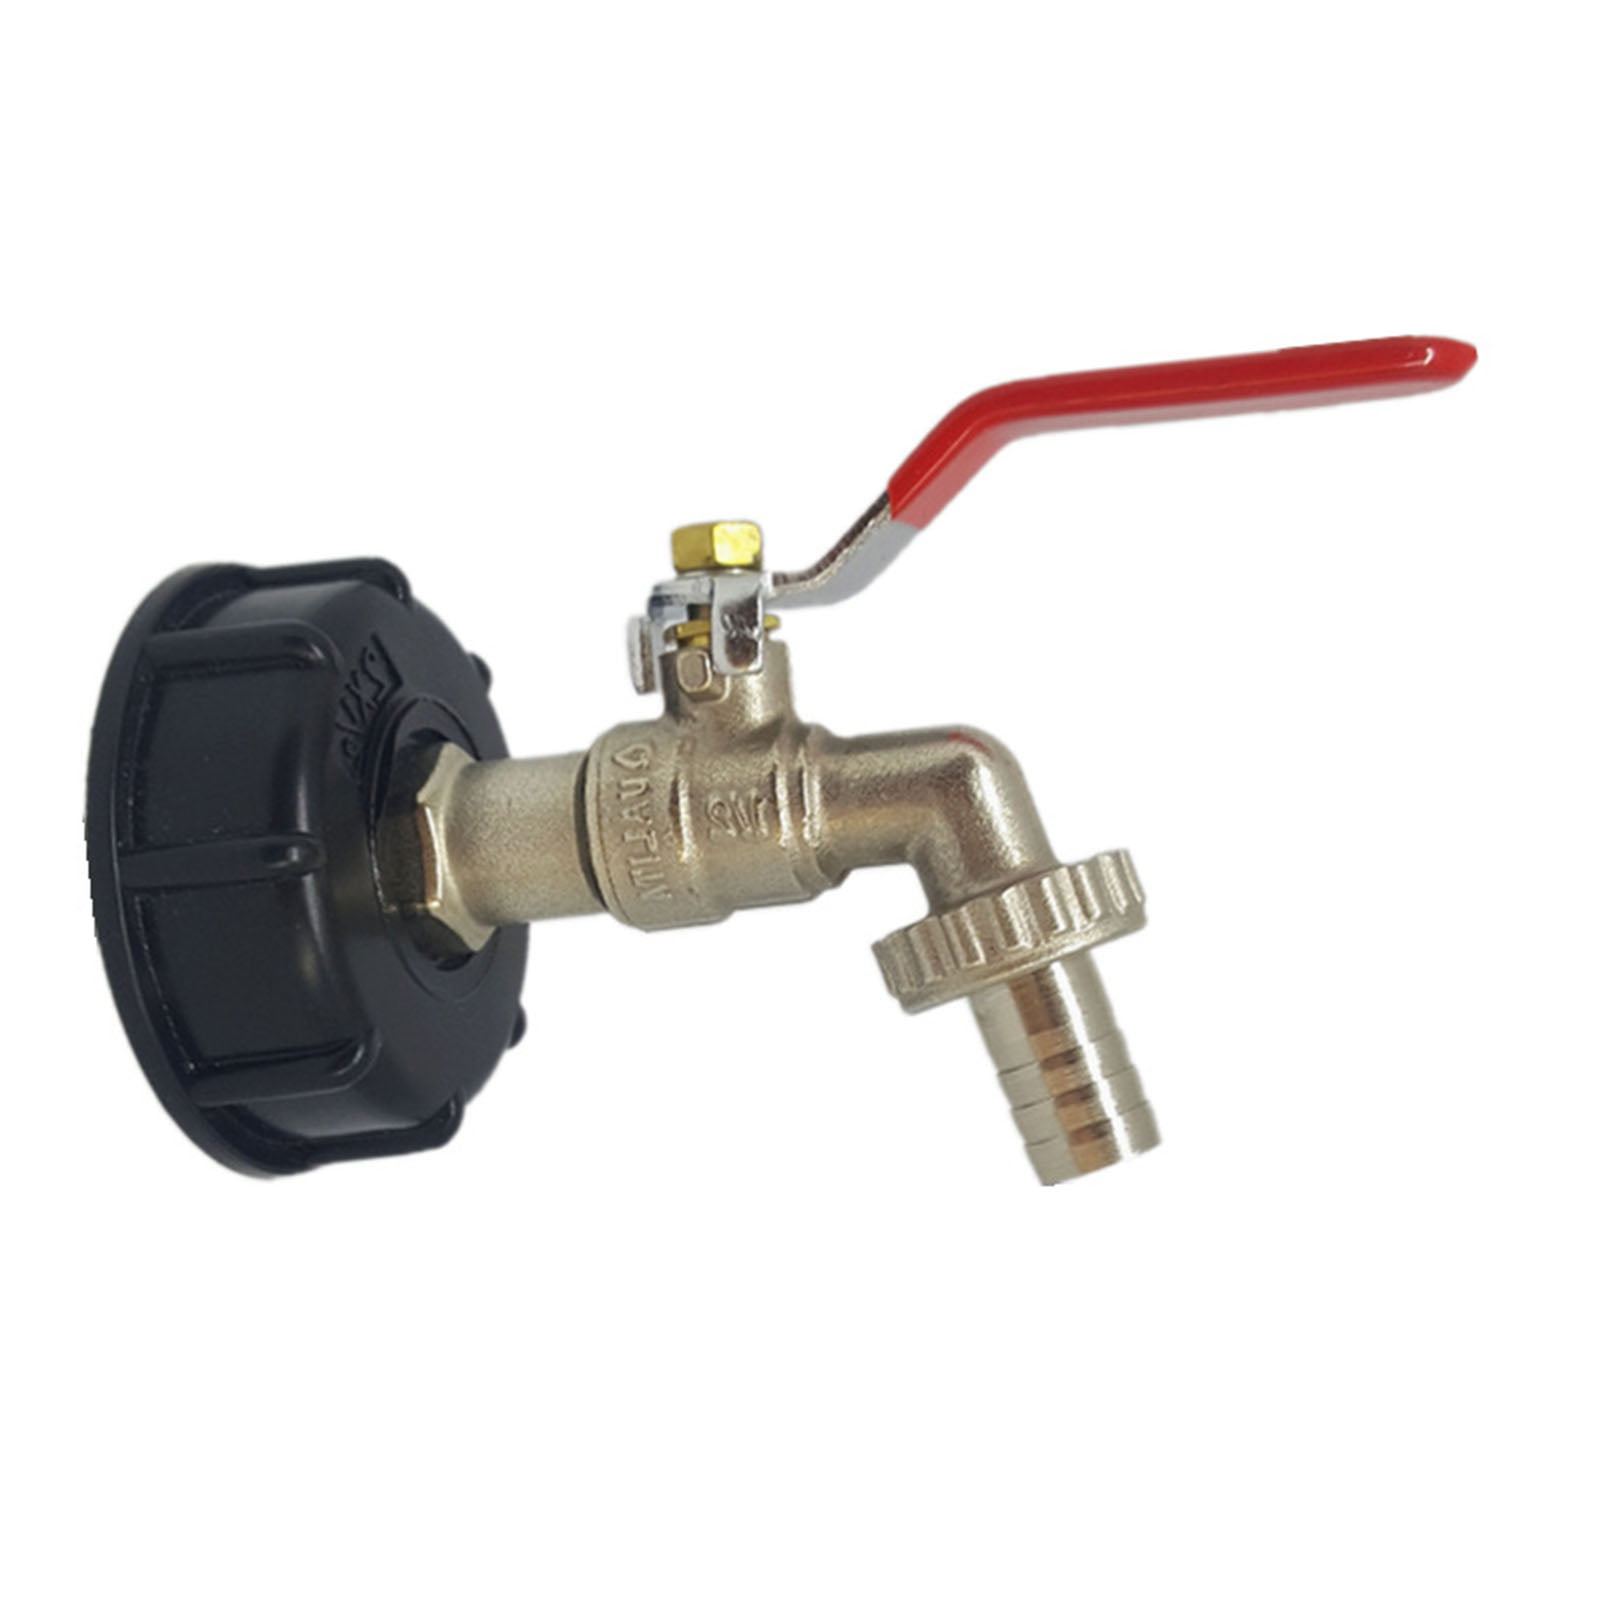 Details about   1PC Unloading Safety Release Valve All Metal Air Pump Air Compressor 1 2/ 3/ 4 